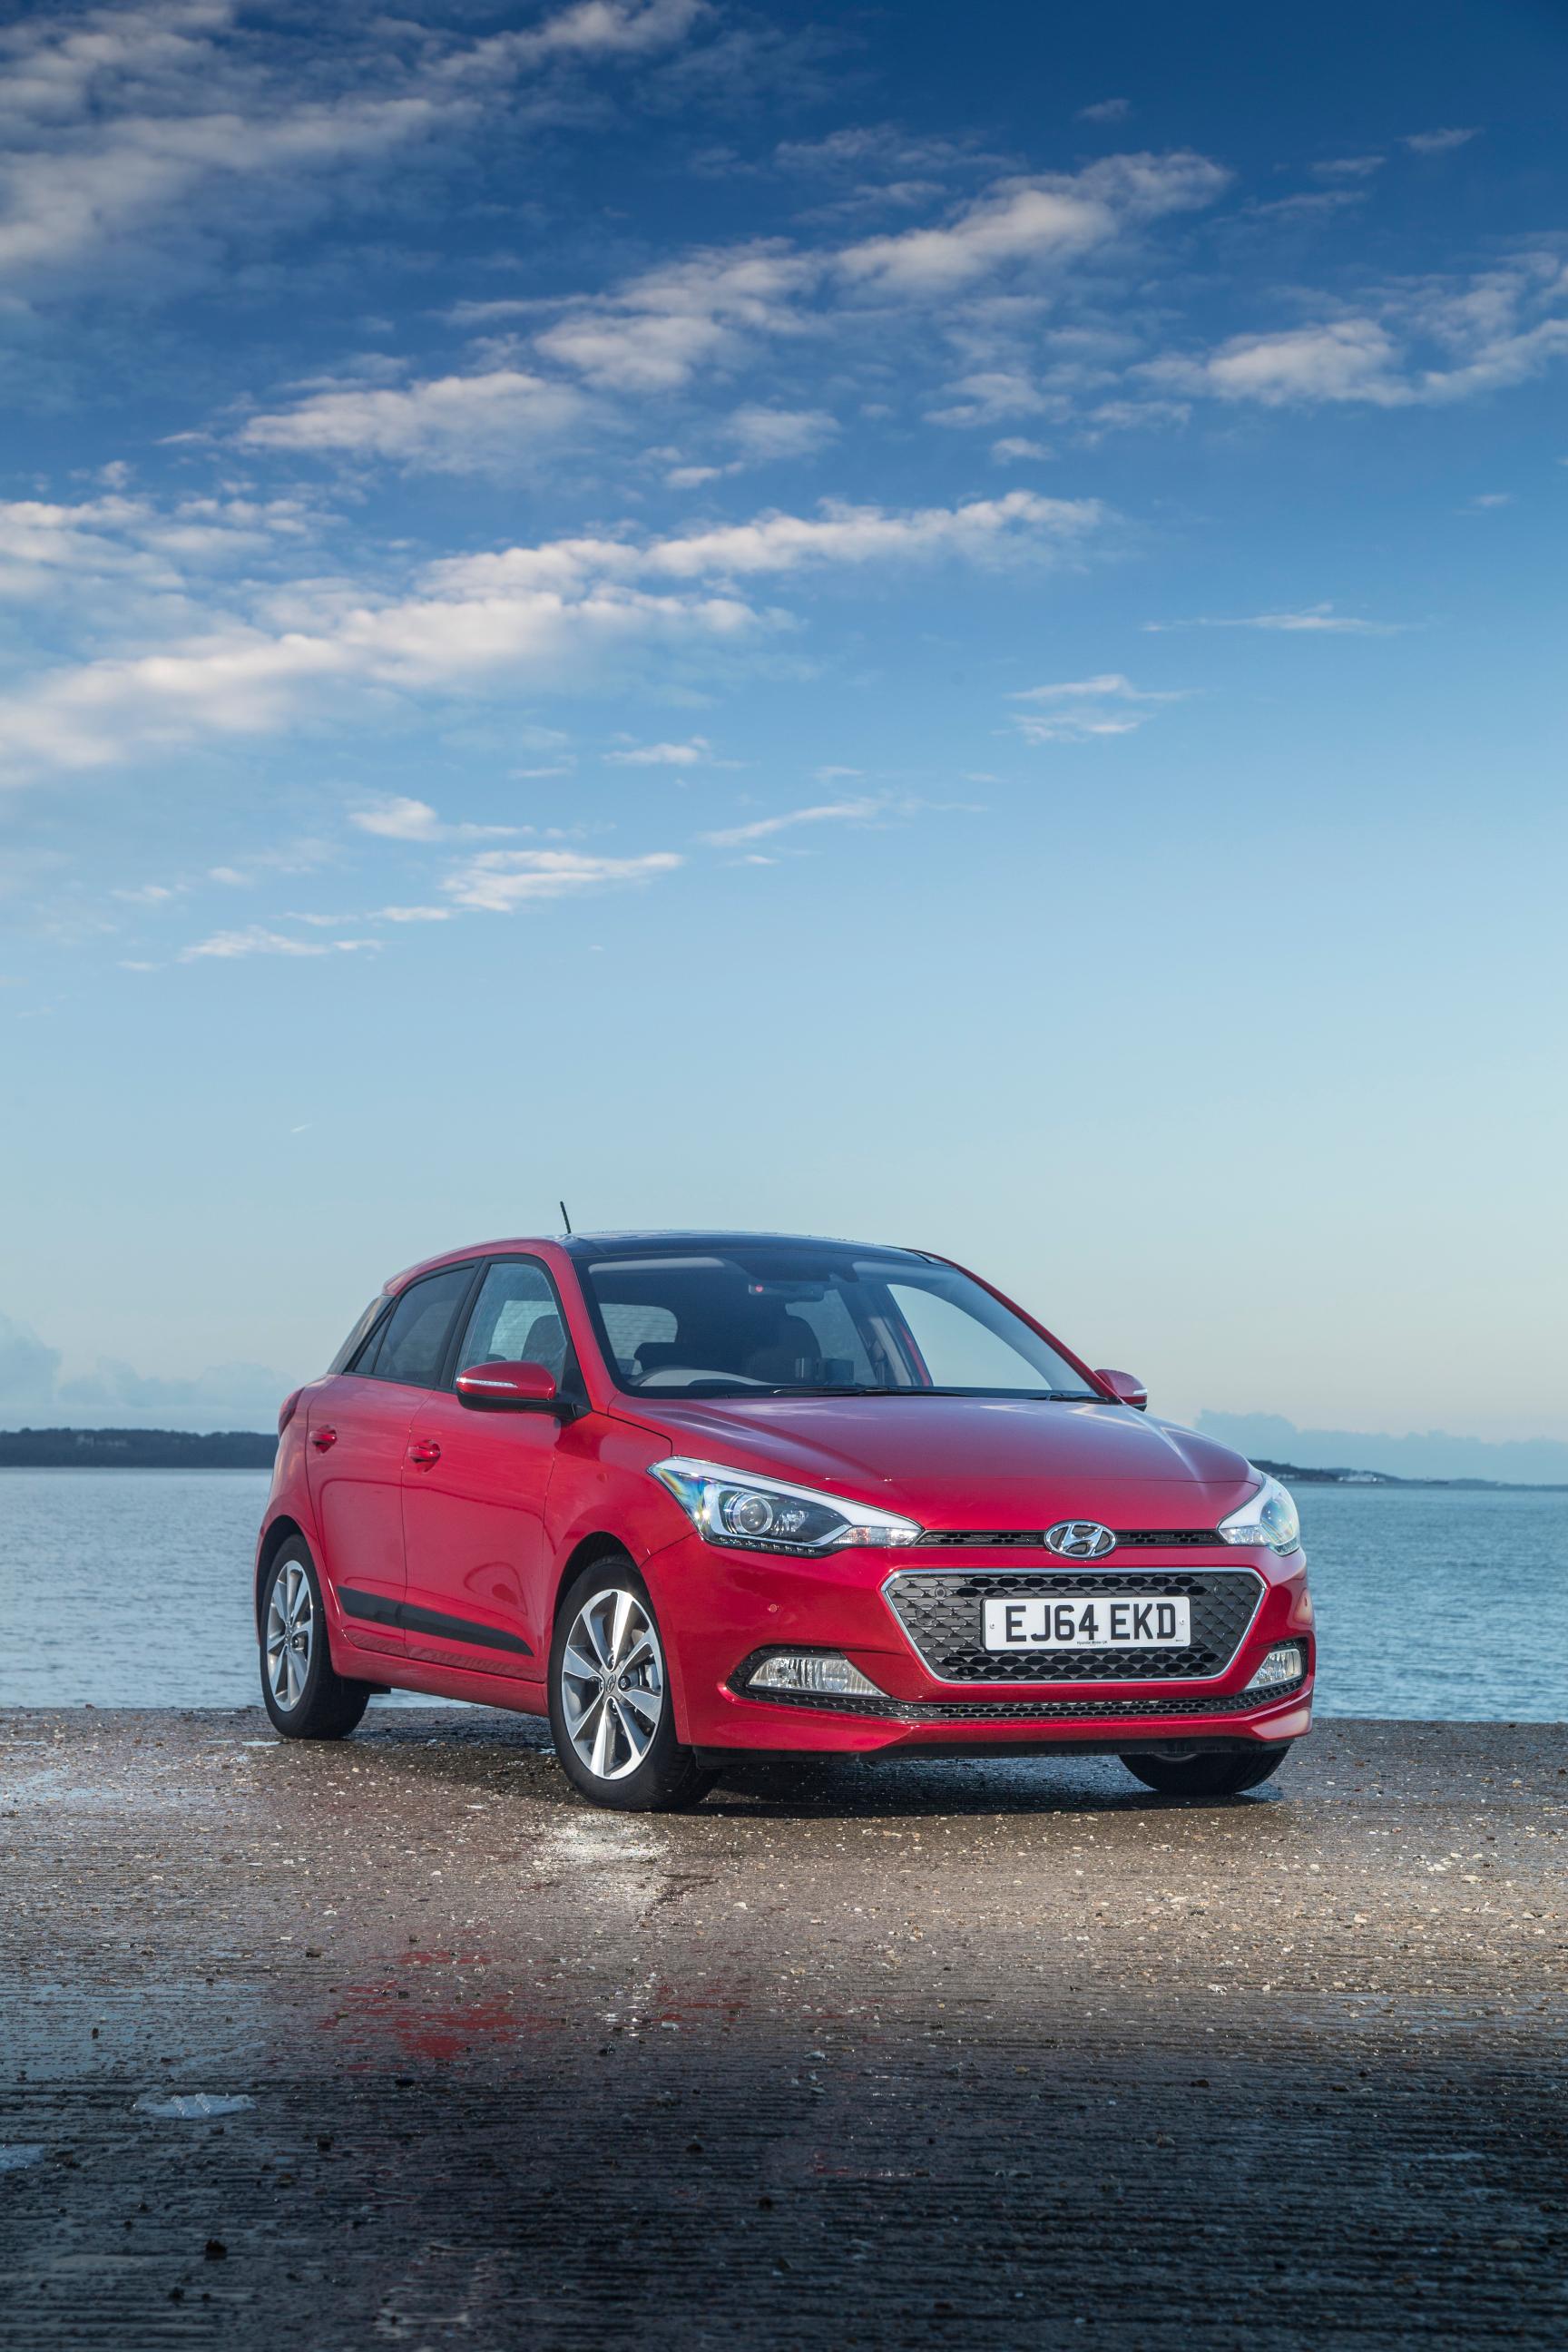 2015 Hyundai i20 Goes on Sale in Britain for Slightly Less than a VW